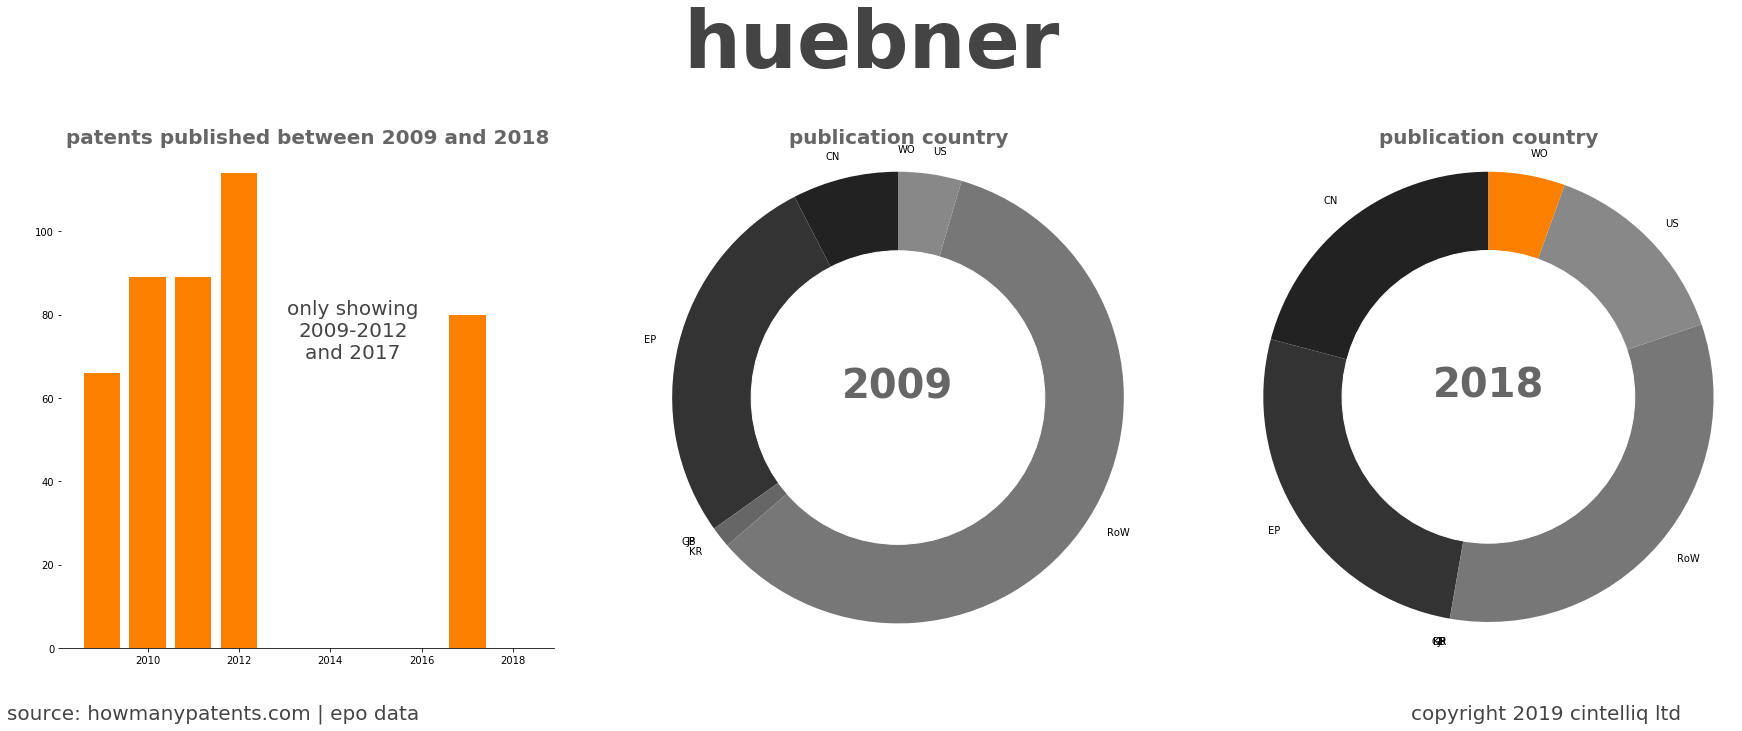 summary of patents for Huebner